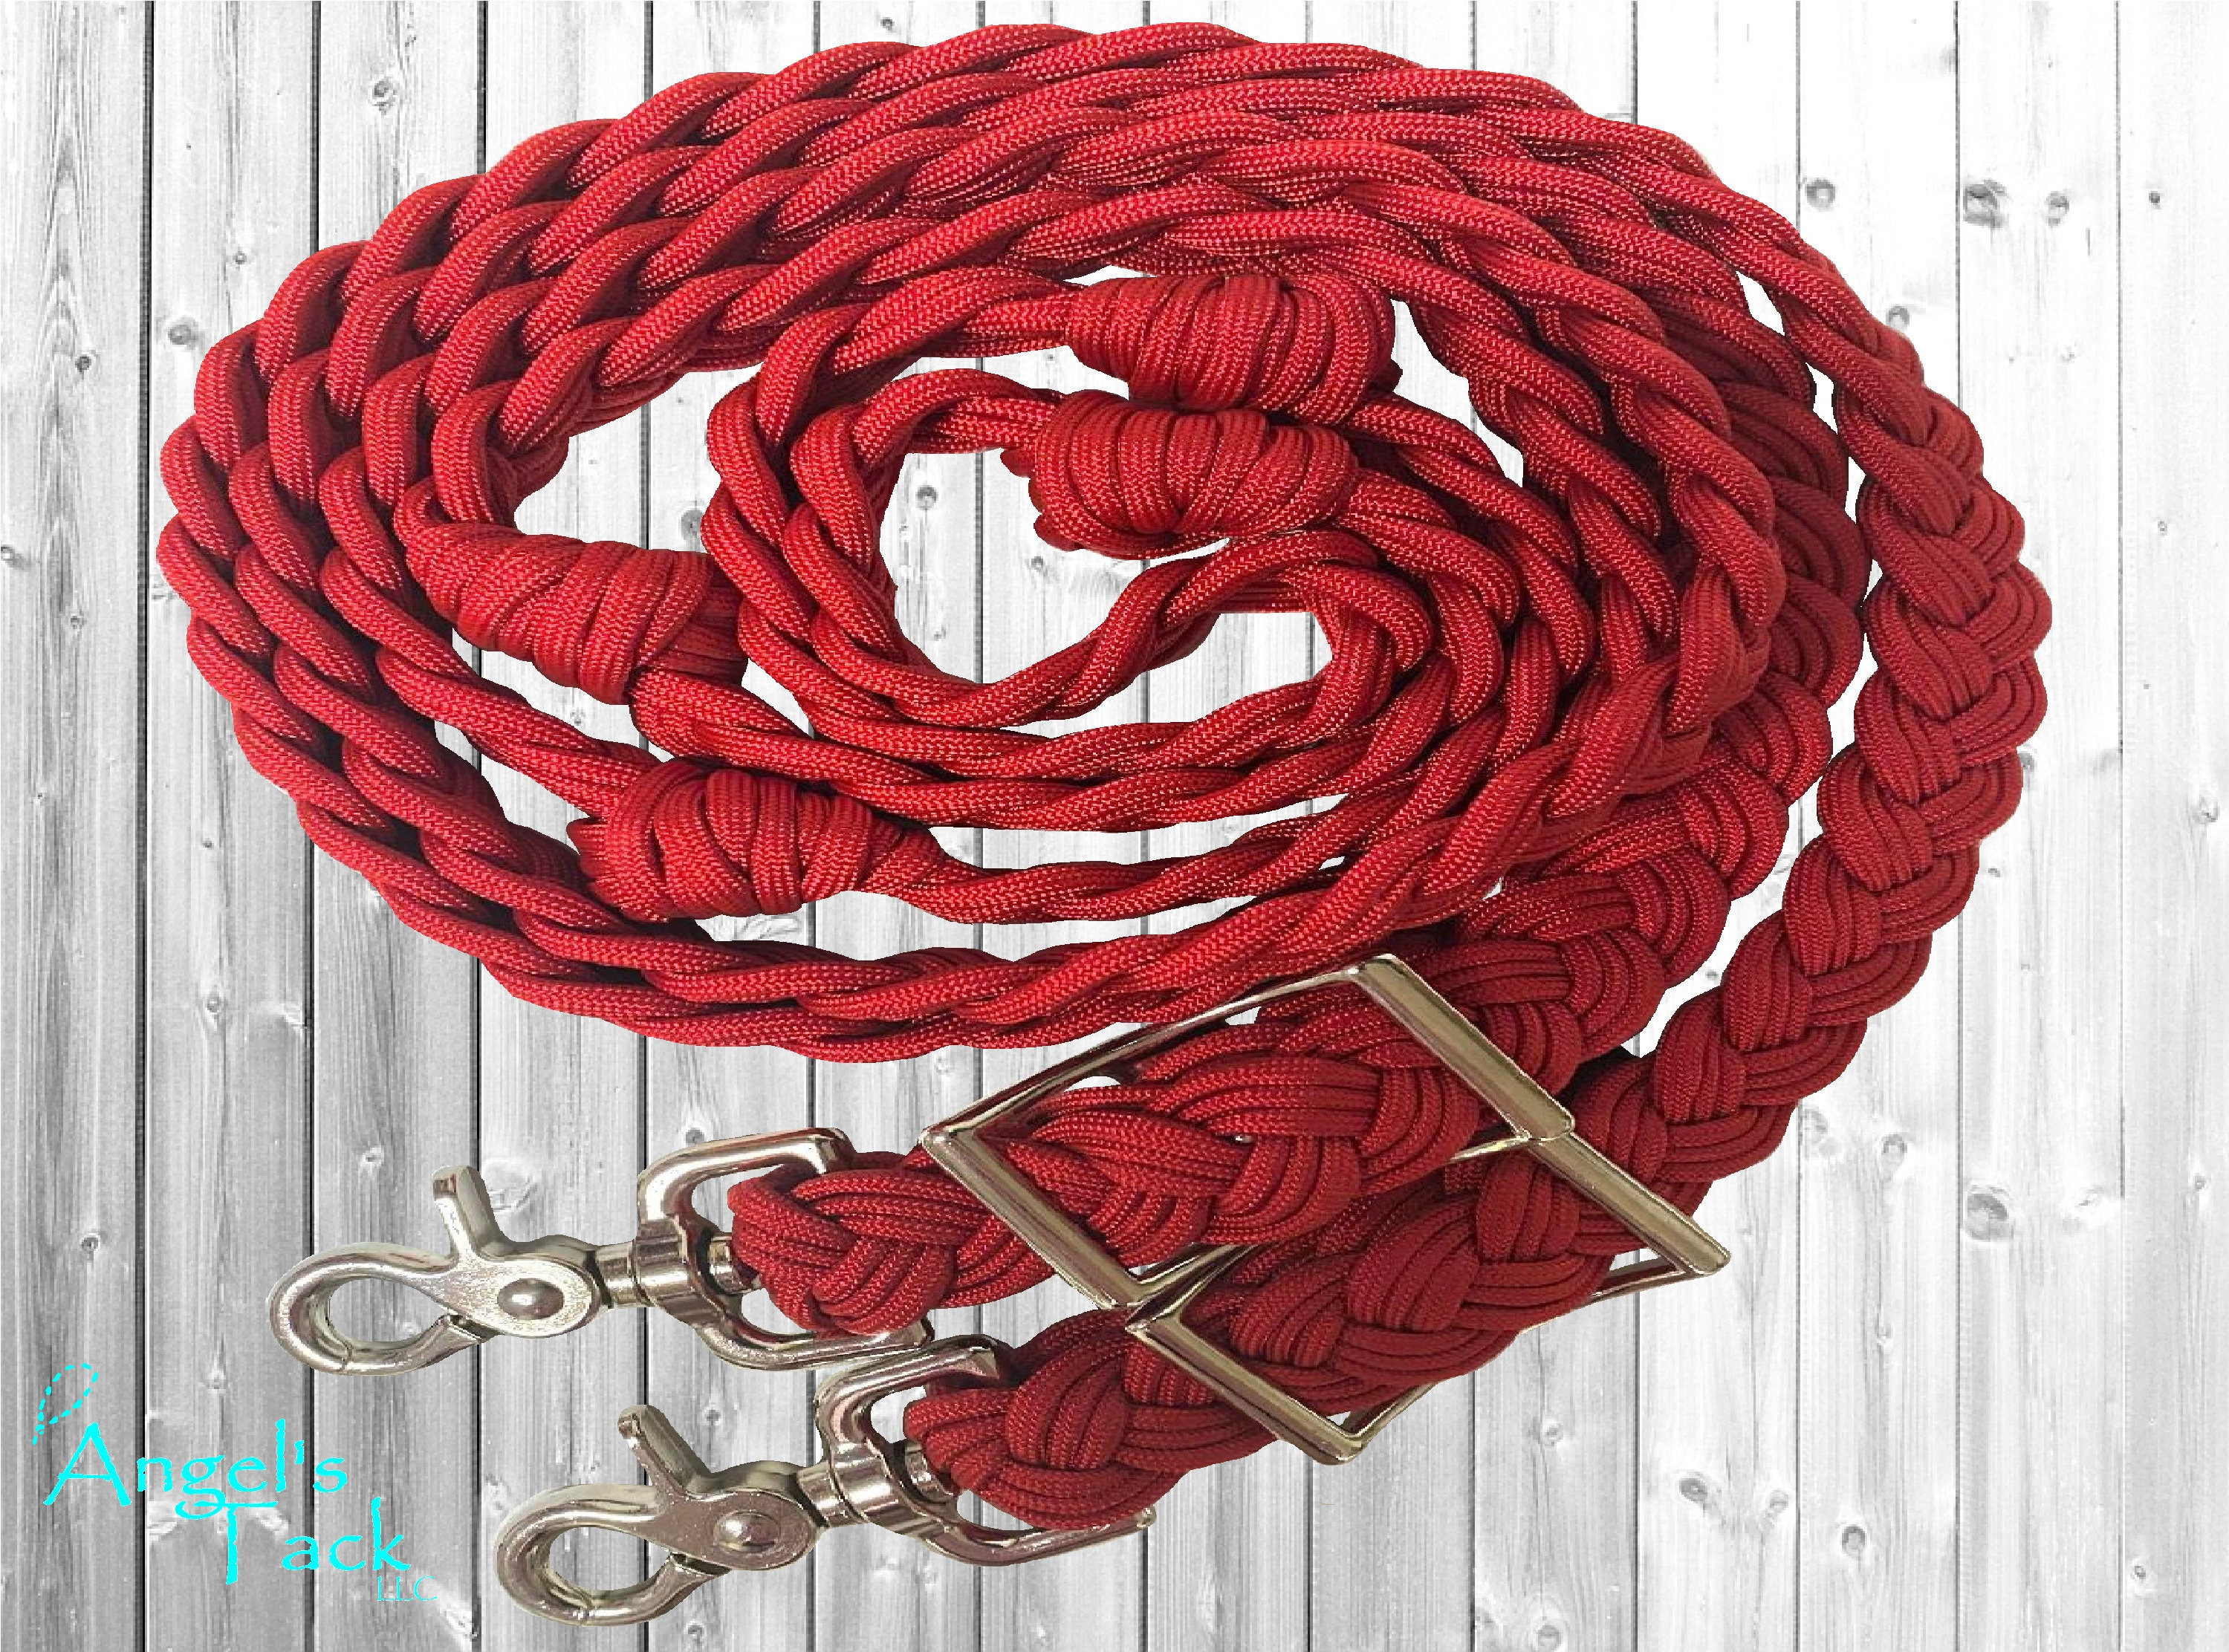 Solid Red 8ft 9 Strand Adjustable Western Riding Braided Knotted